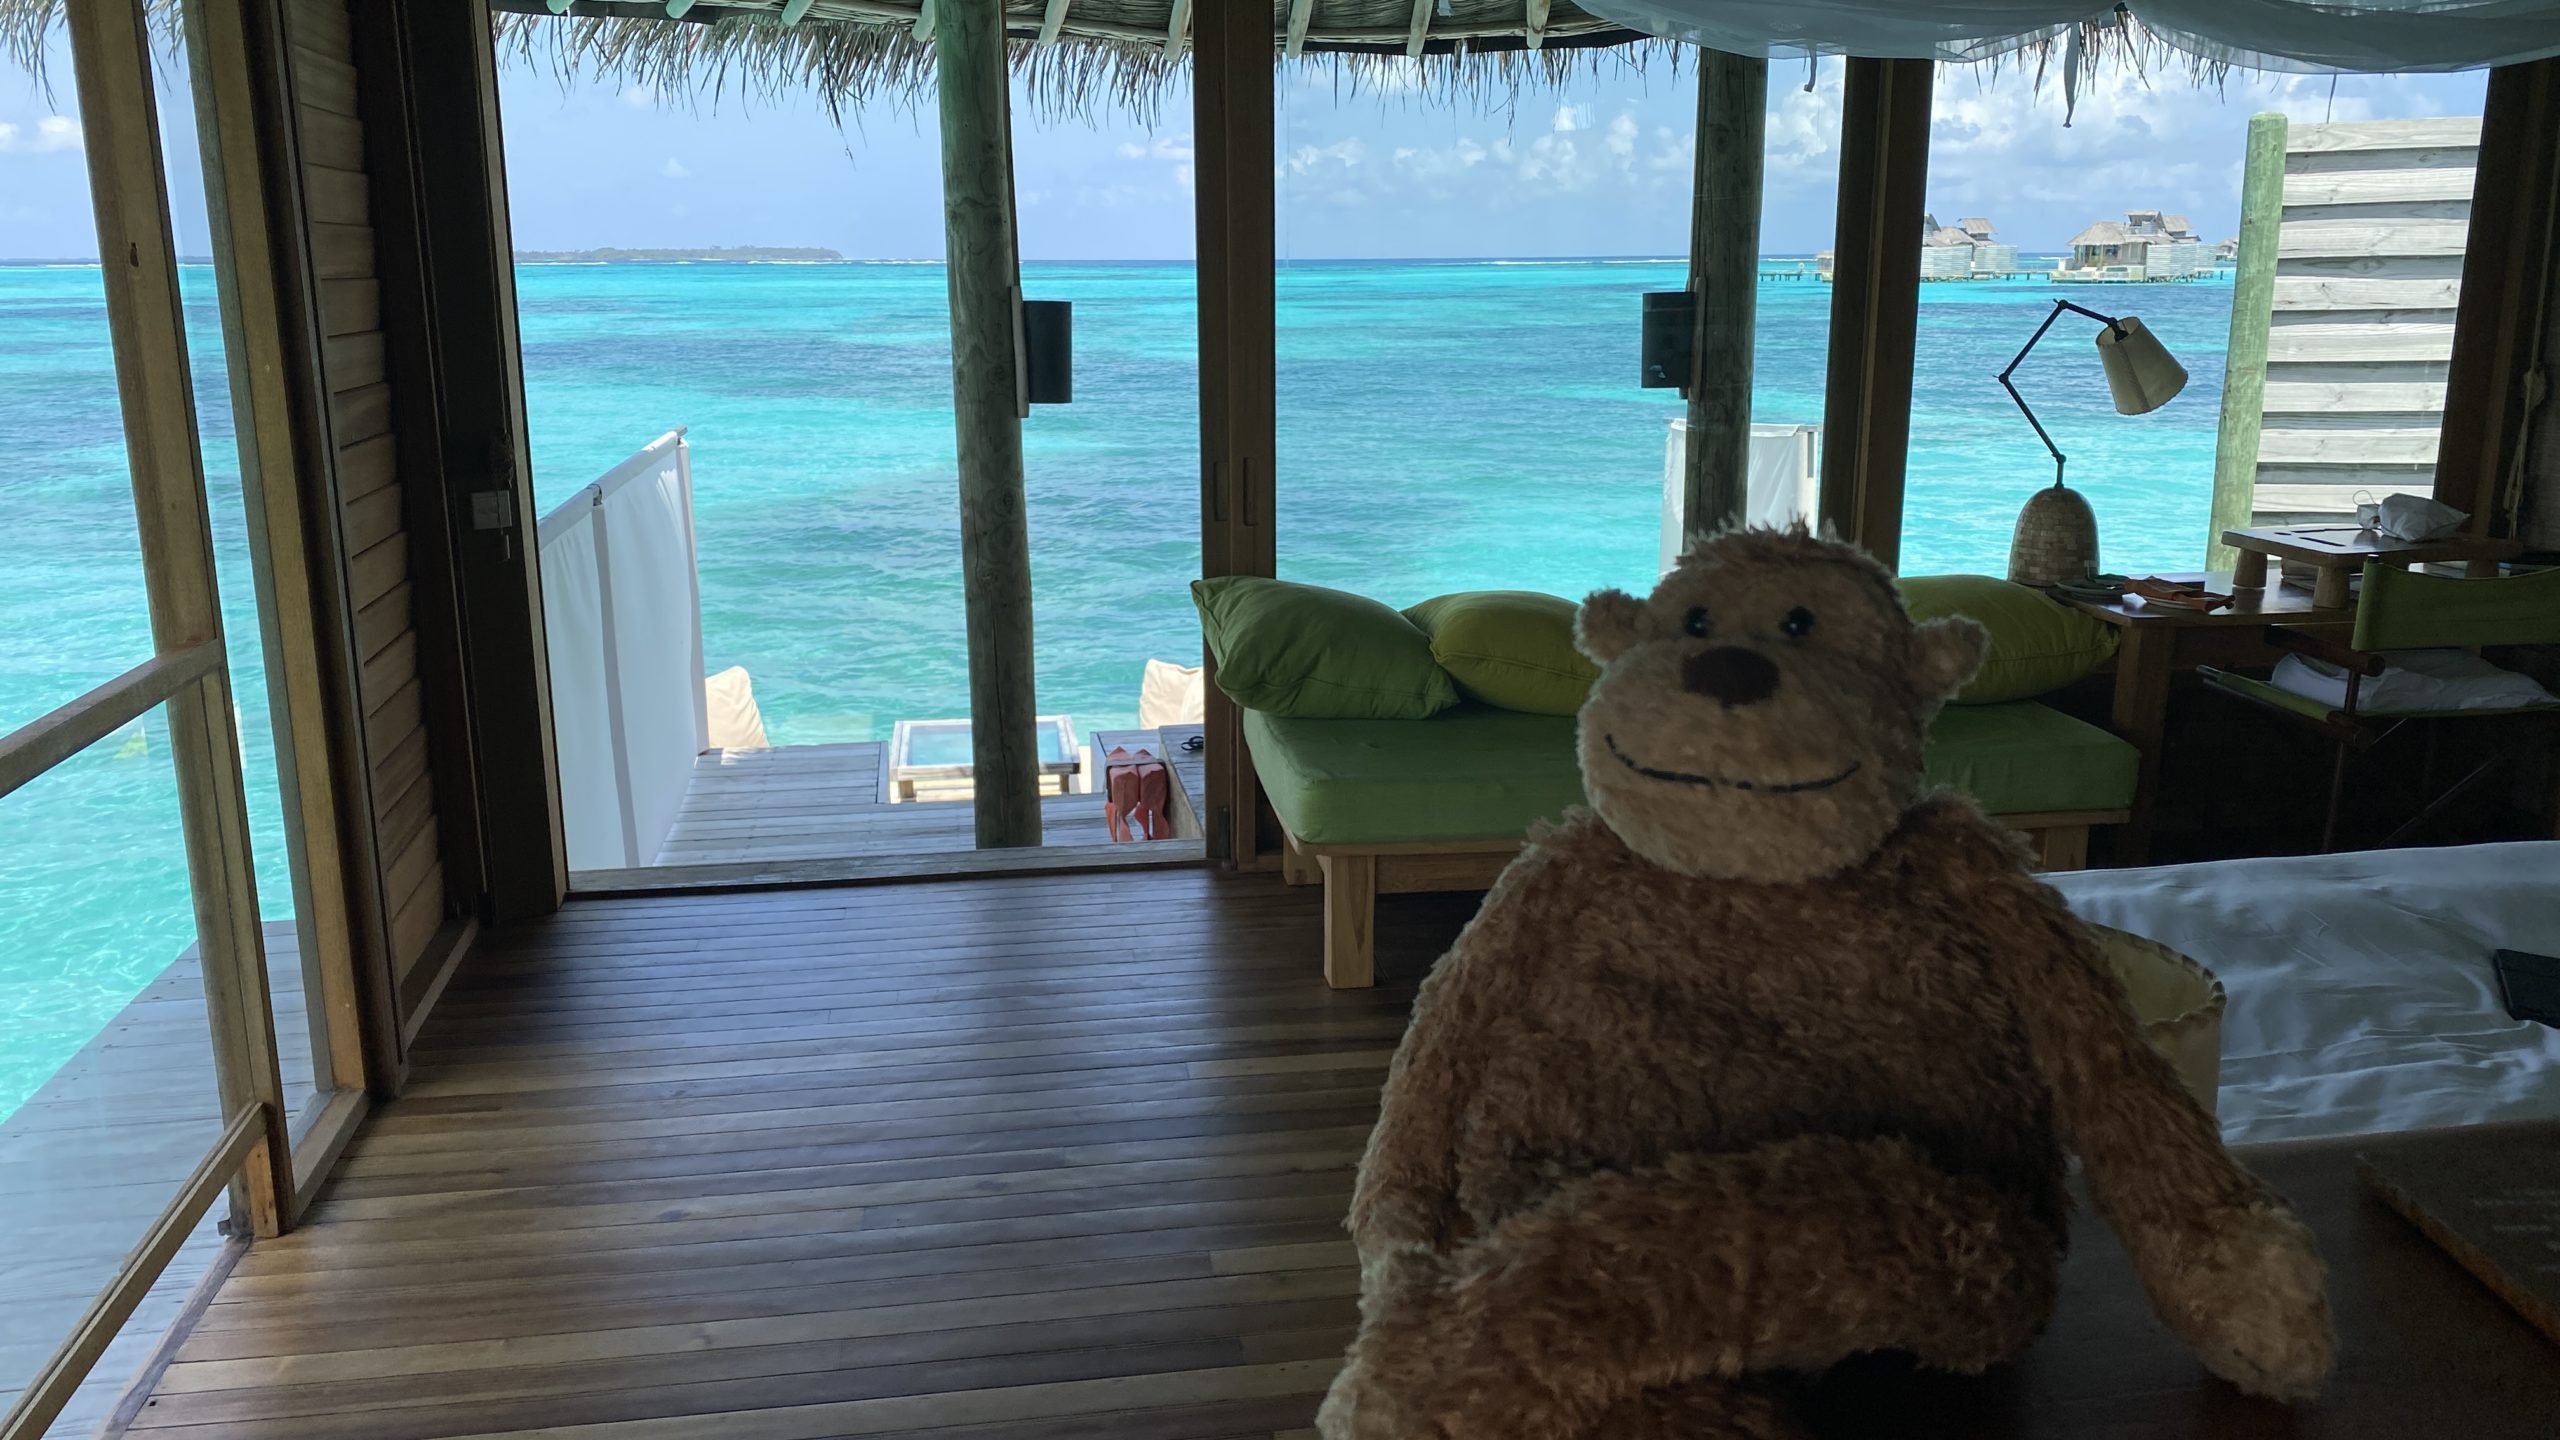 a stuffed animal sitting in a room with a view of the ocean